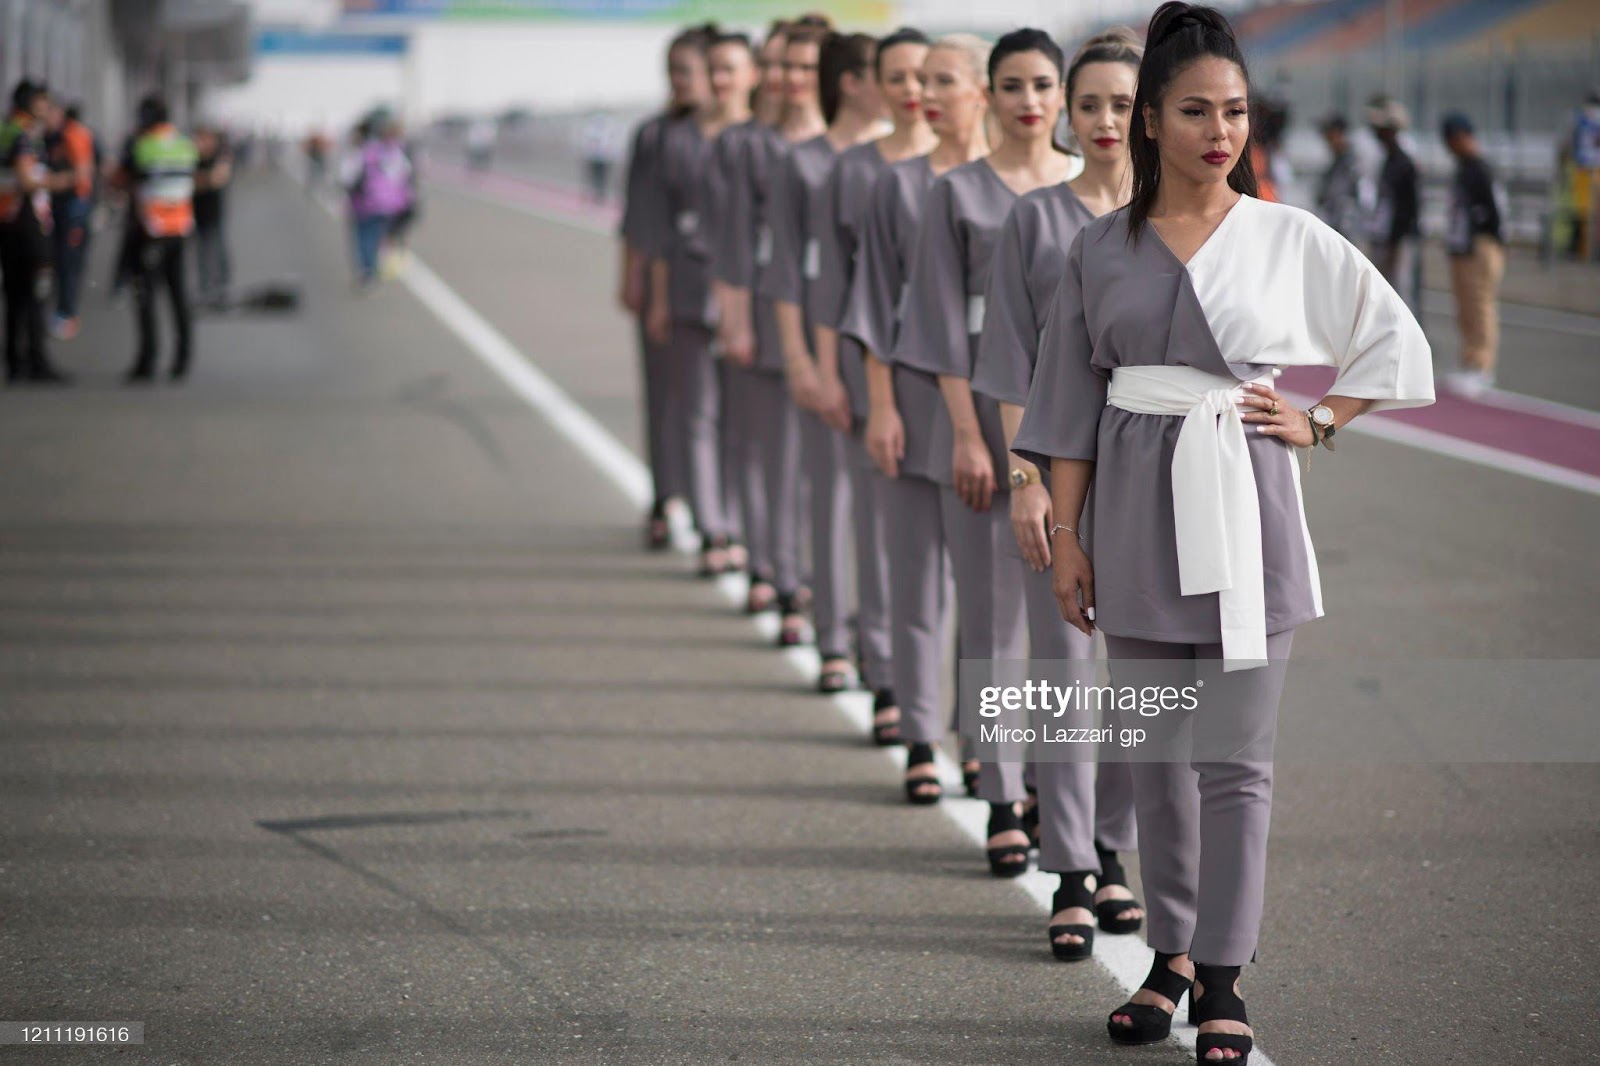 D:\Documenti\posts\posts\Women and motorsport\foto\Getty e altre\the-grid-girls-pose-in-pit-before-the-grid-during-the-moto4-race-the-picture-id1211191616.jpg